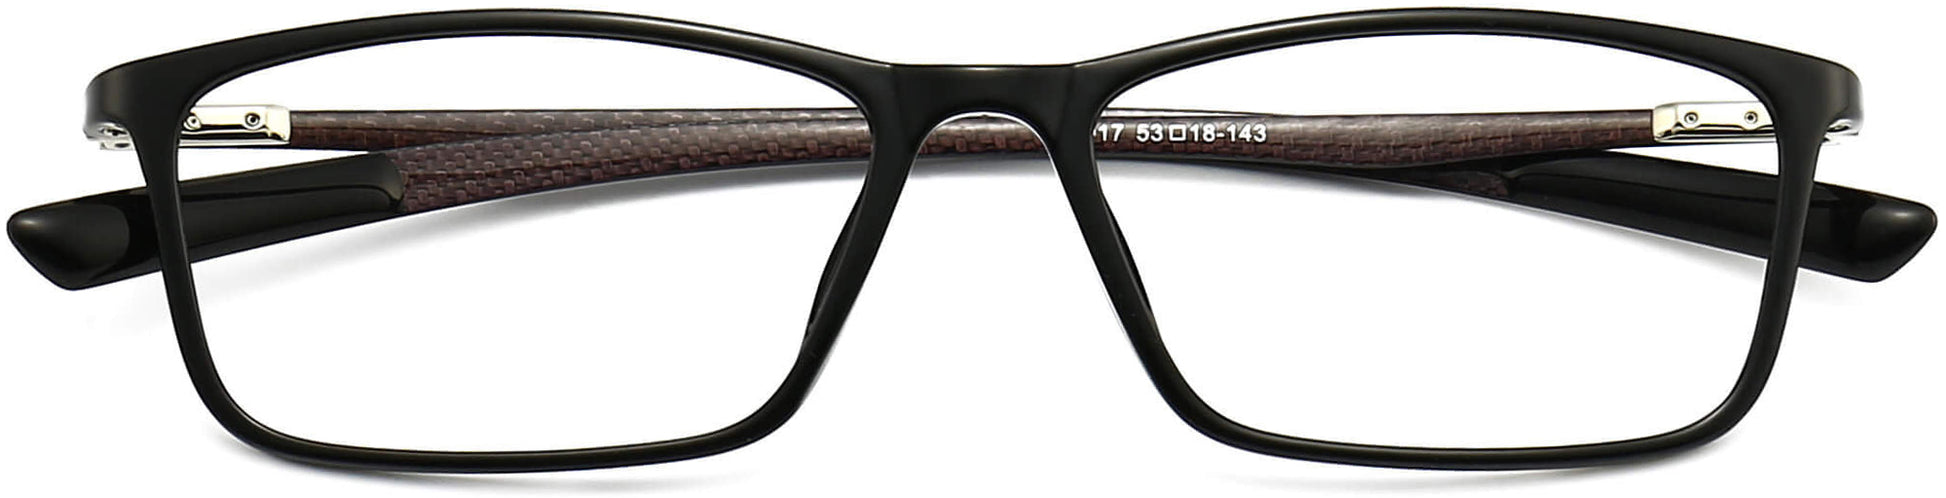 Aabriella Rectangle Black Eyeglasses from ANRRI, closed view